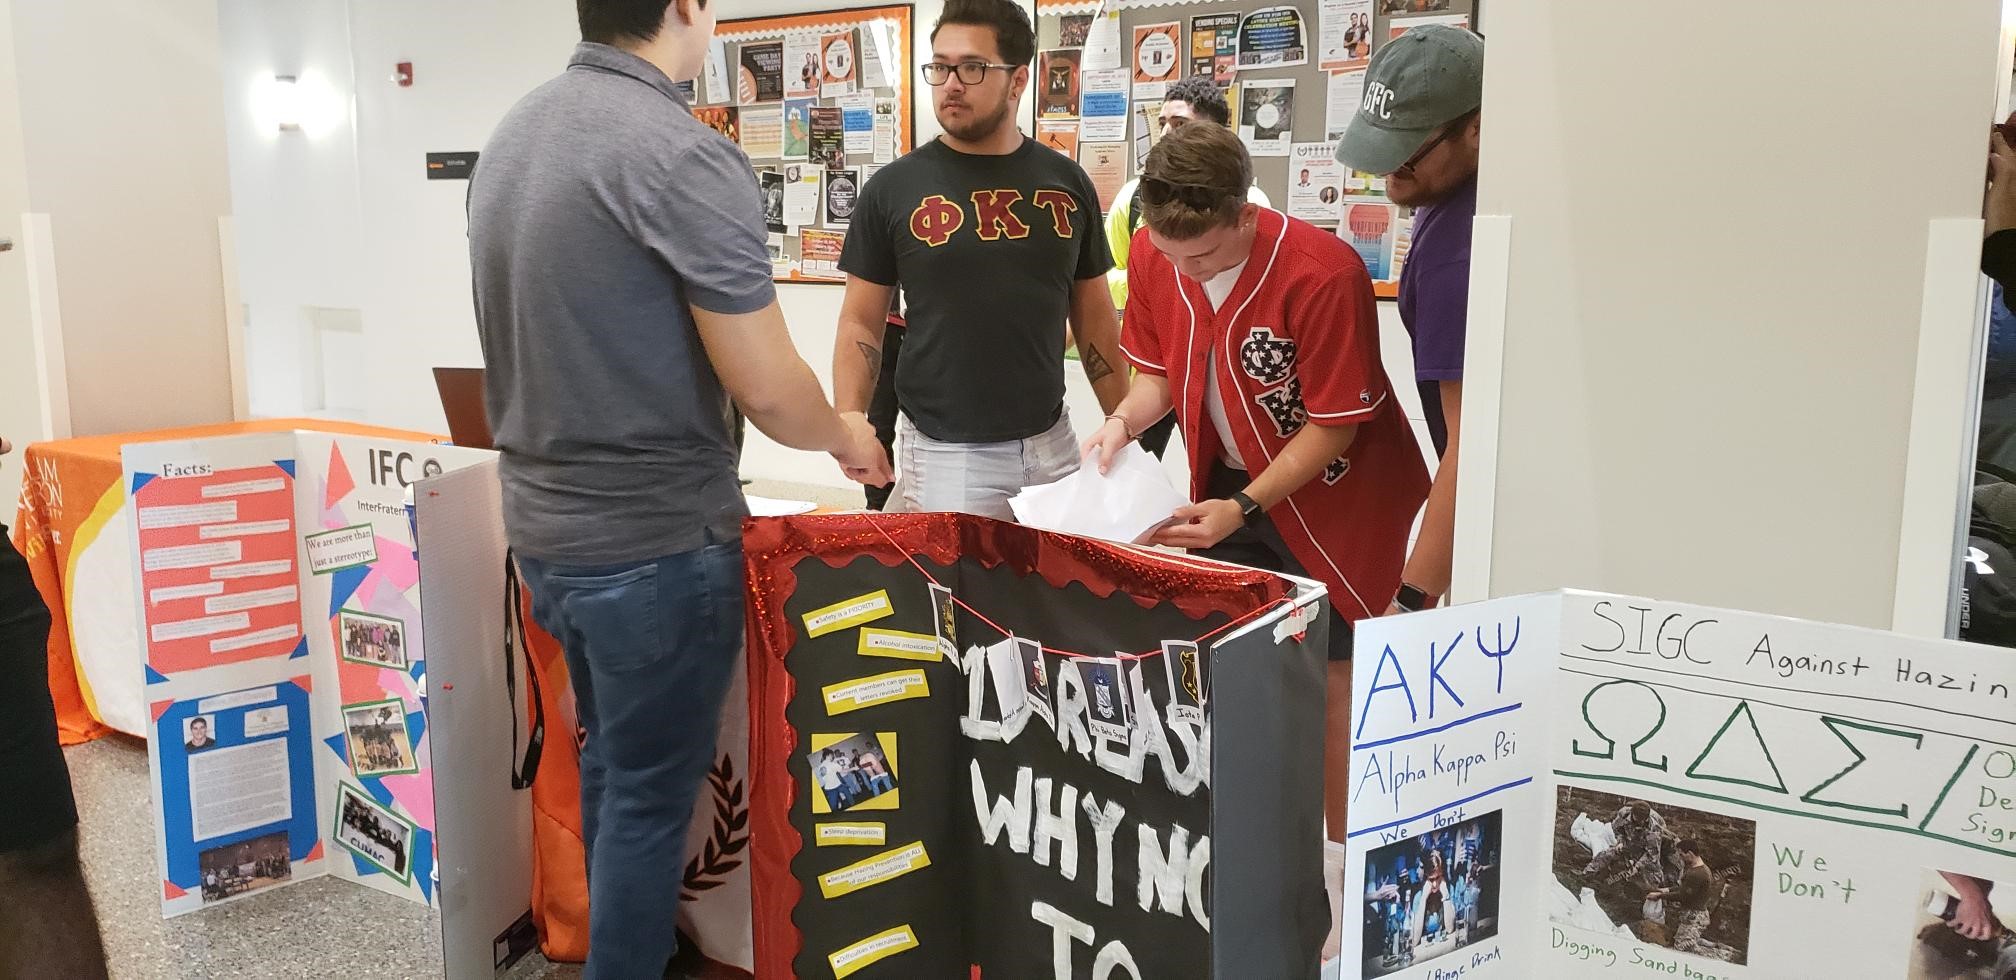 Fraternities and Sororities at William Paterson University